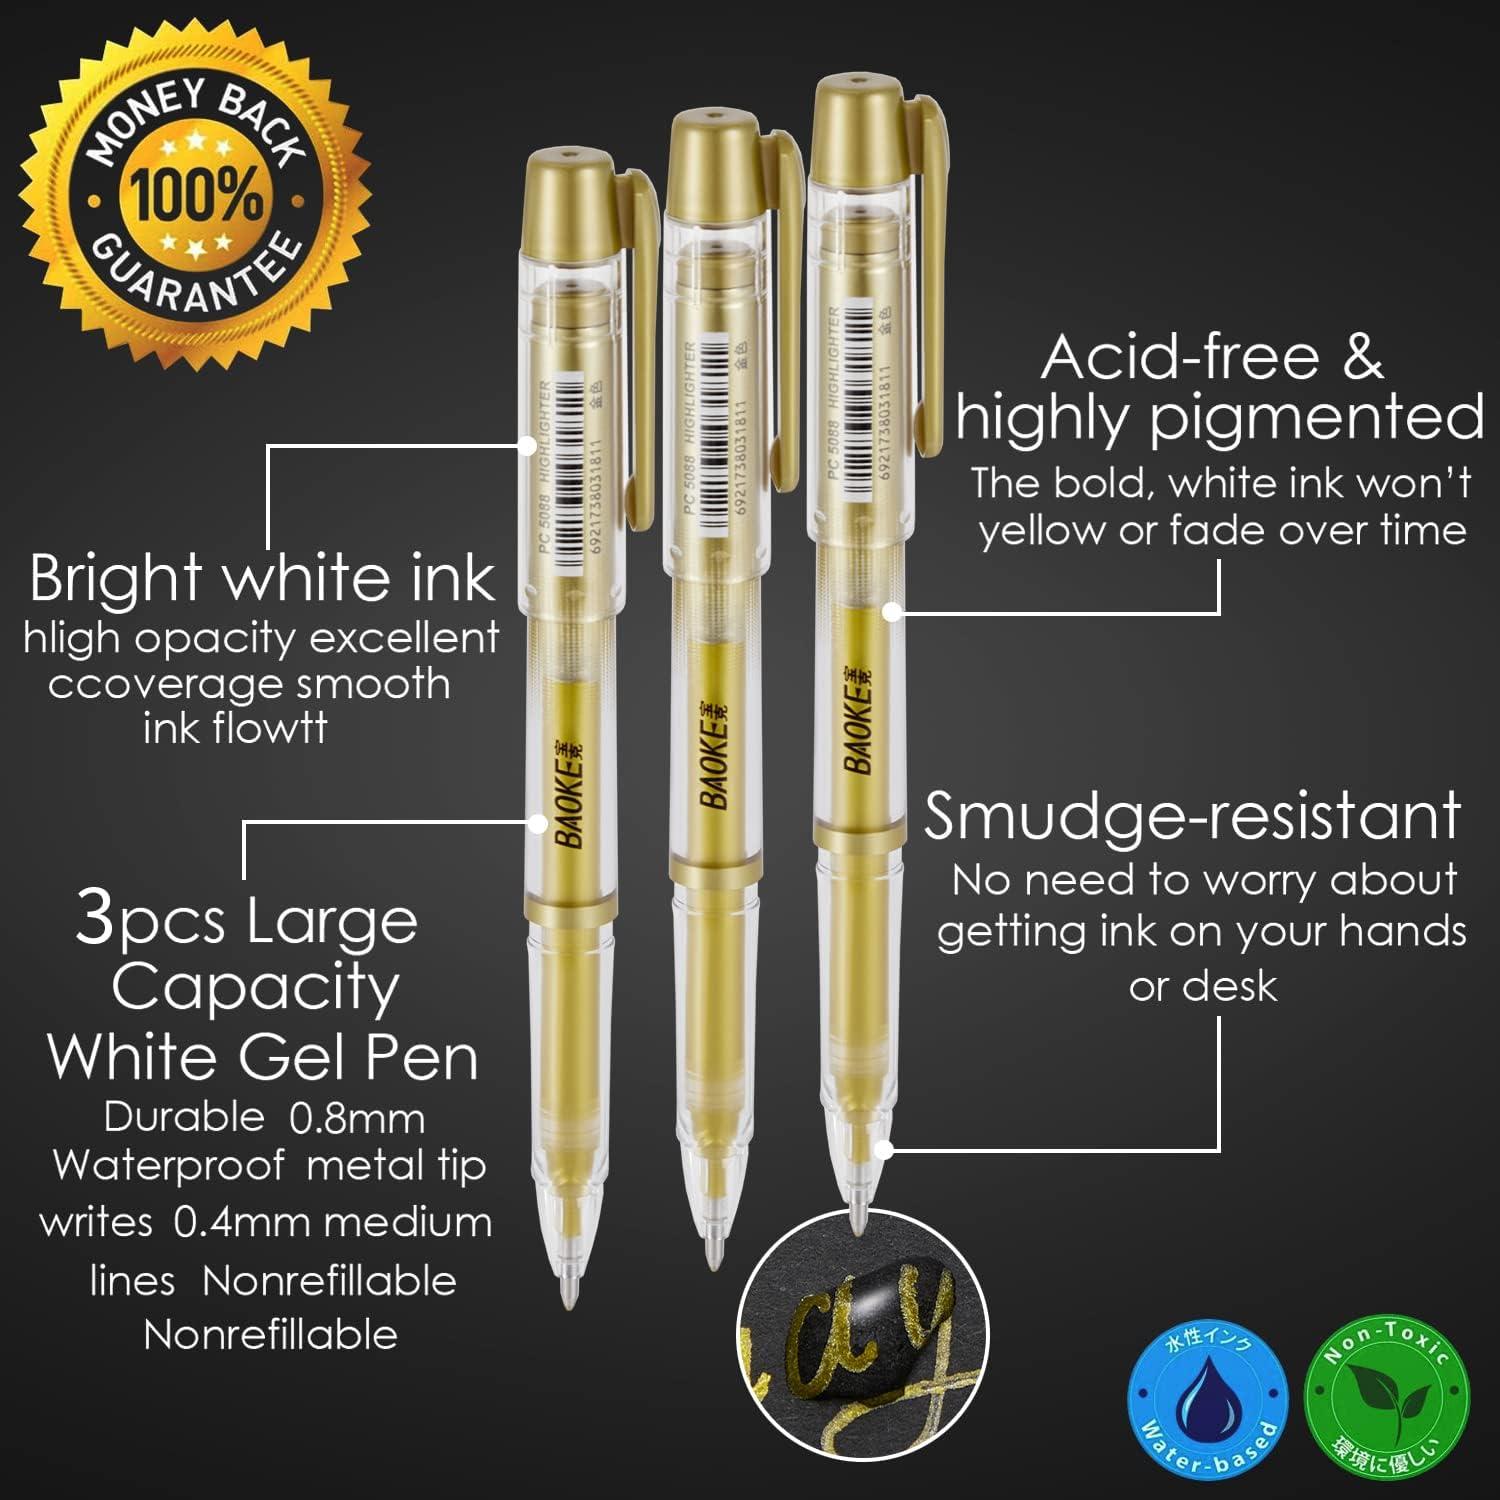 Qionew 2 Colors Gel Pen Set - Gold and Silver Gel Ink Pens for Artists with 0.8mm Nibs, White Rollerball Pens for Writing, Sketching, Illustration